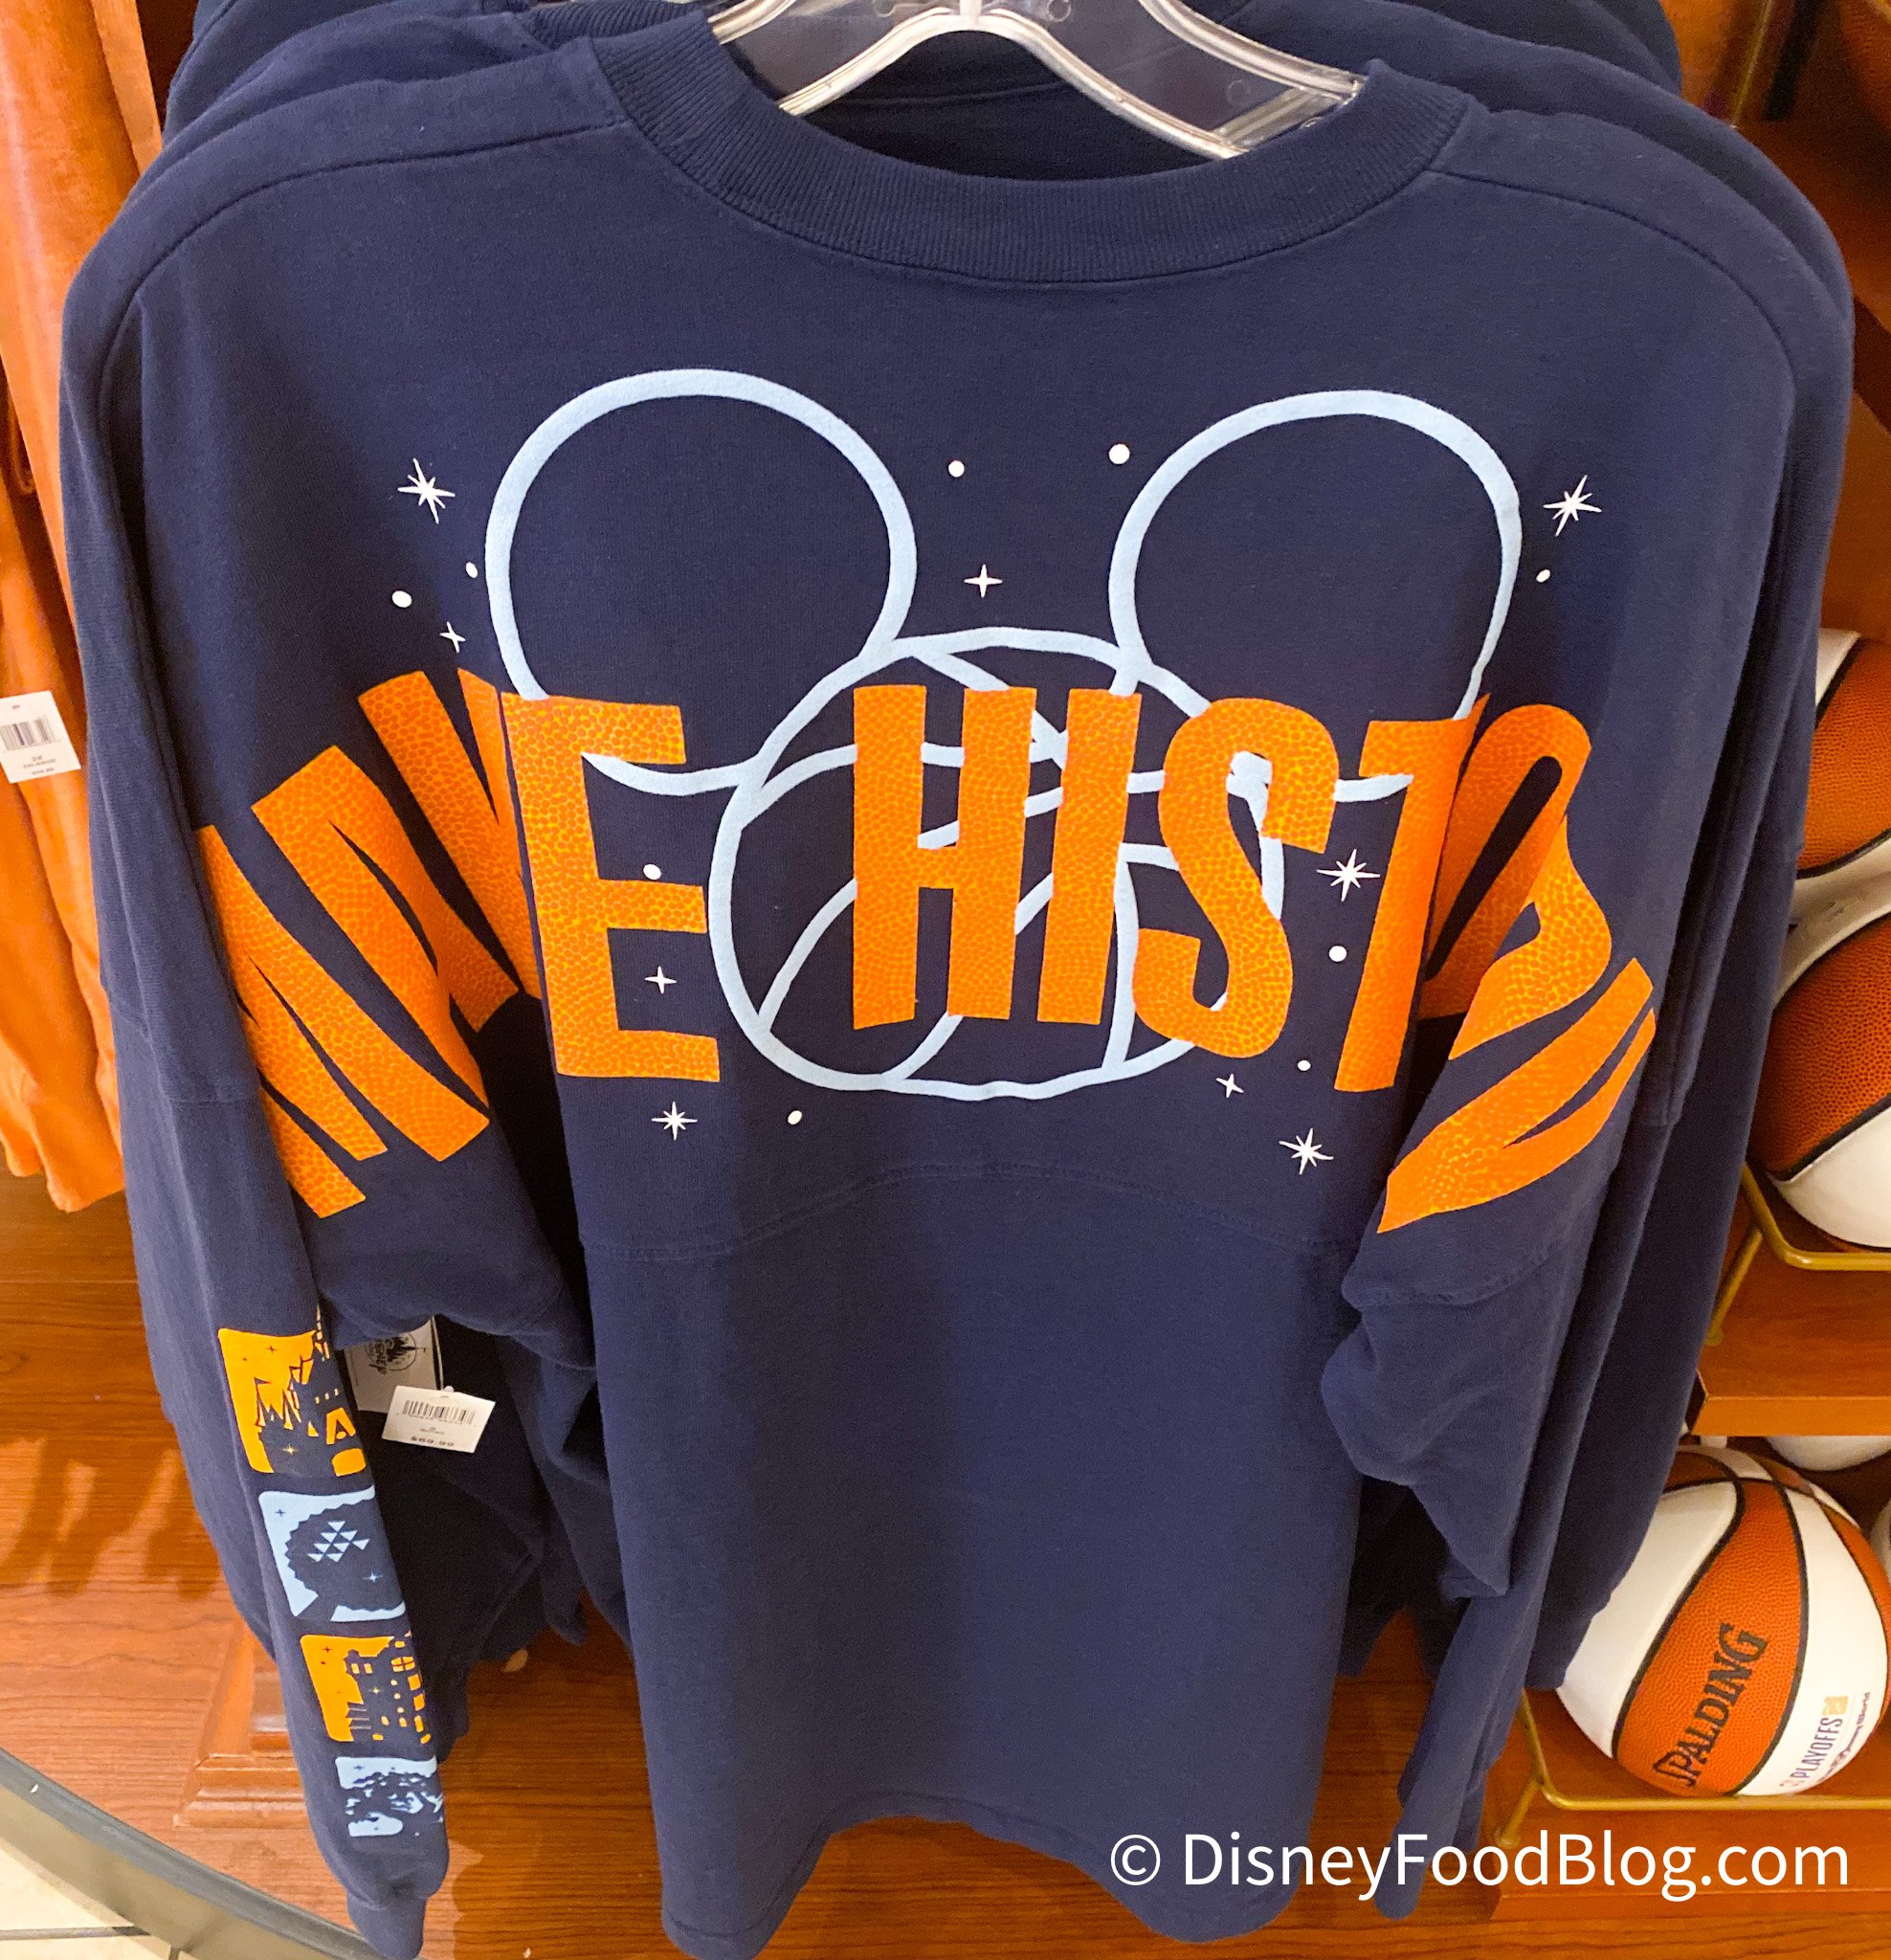 PHOTOS! Check Out All of the NBA Merch We Spotted at Walt Disney